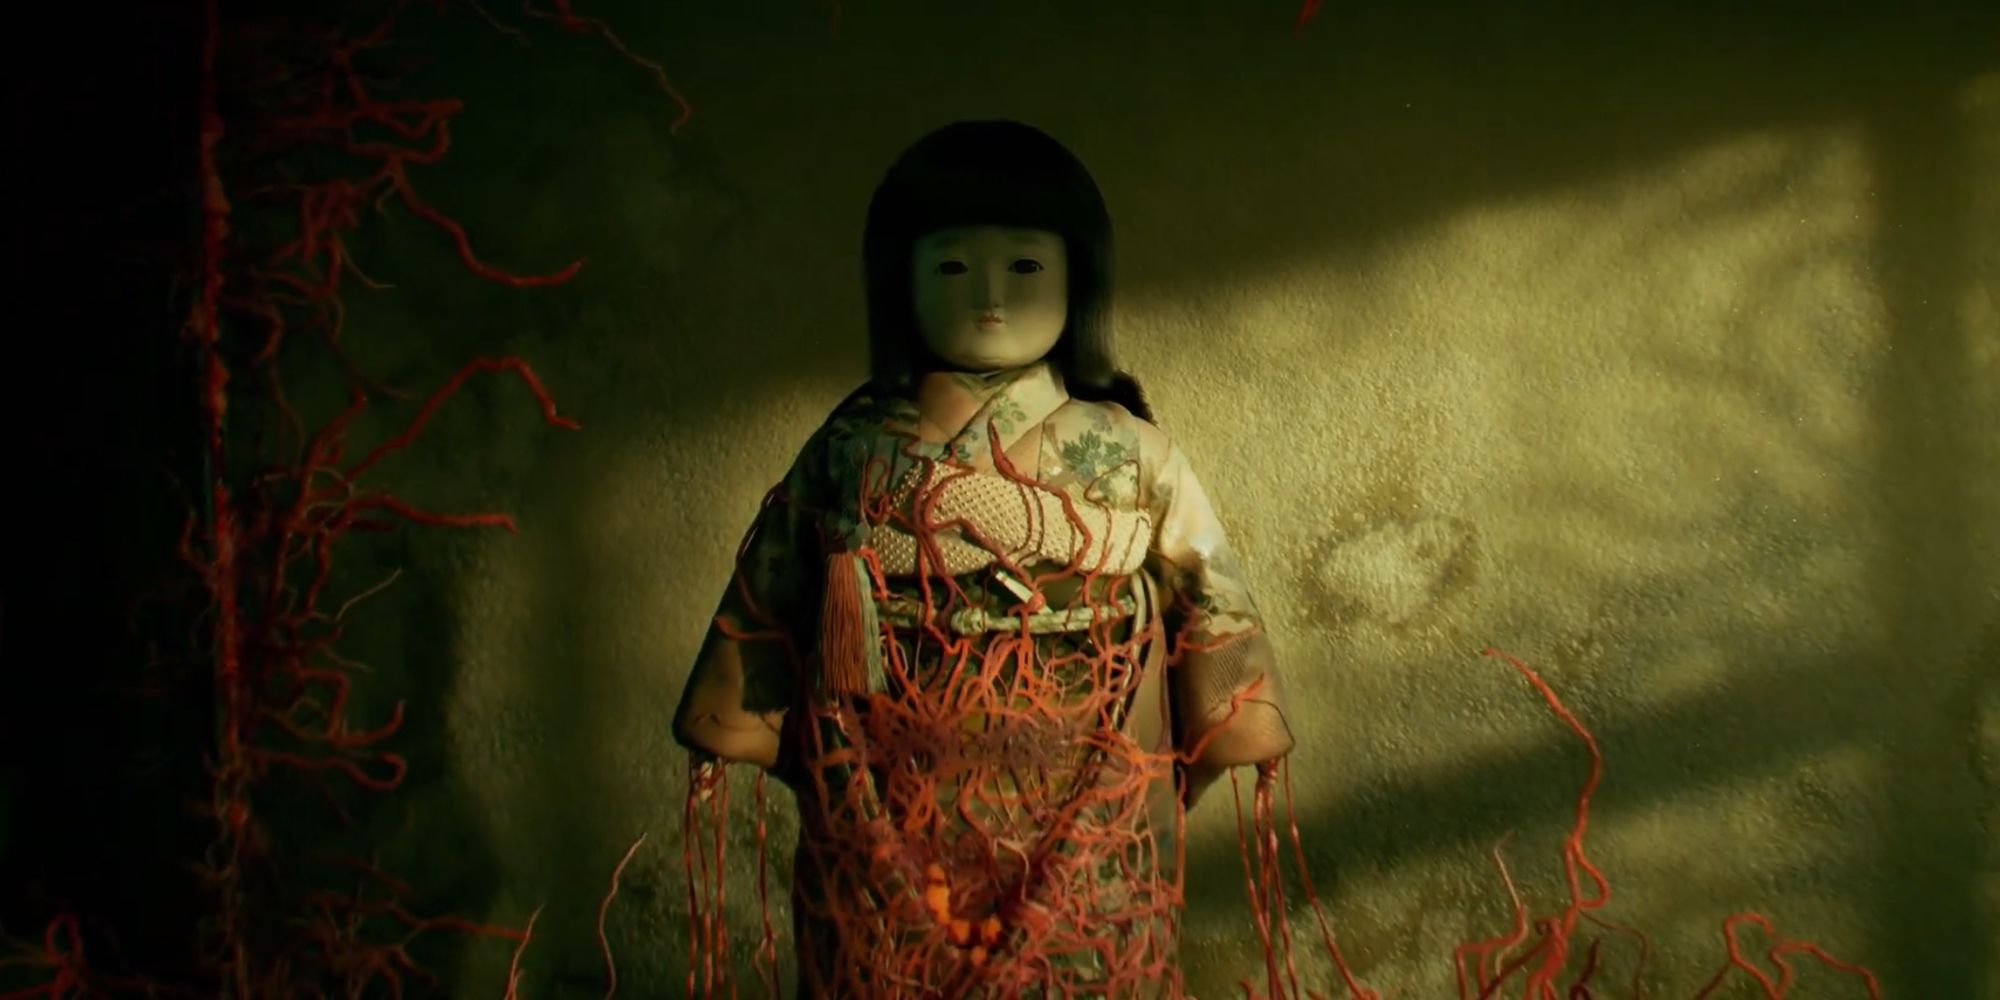 A creepy doll in Silent Hill f, with some strange growth forming on it.